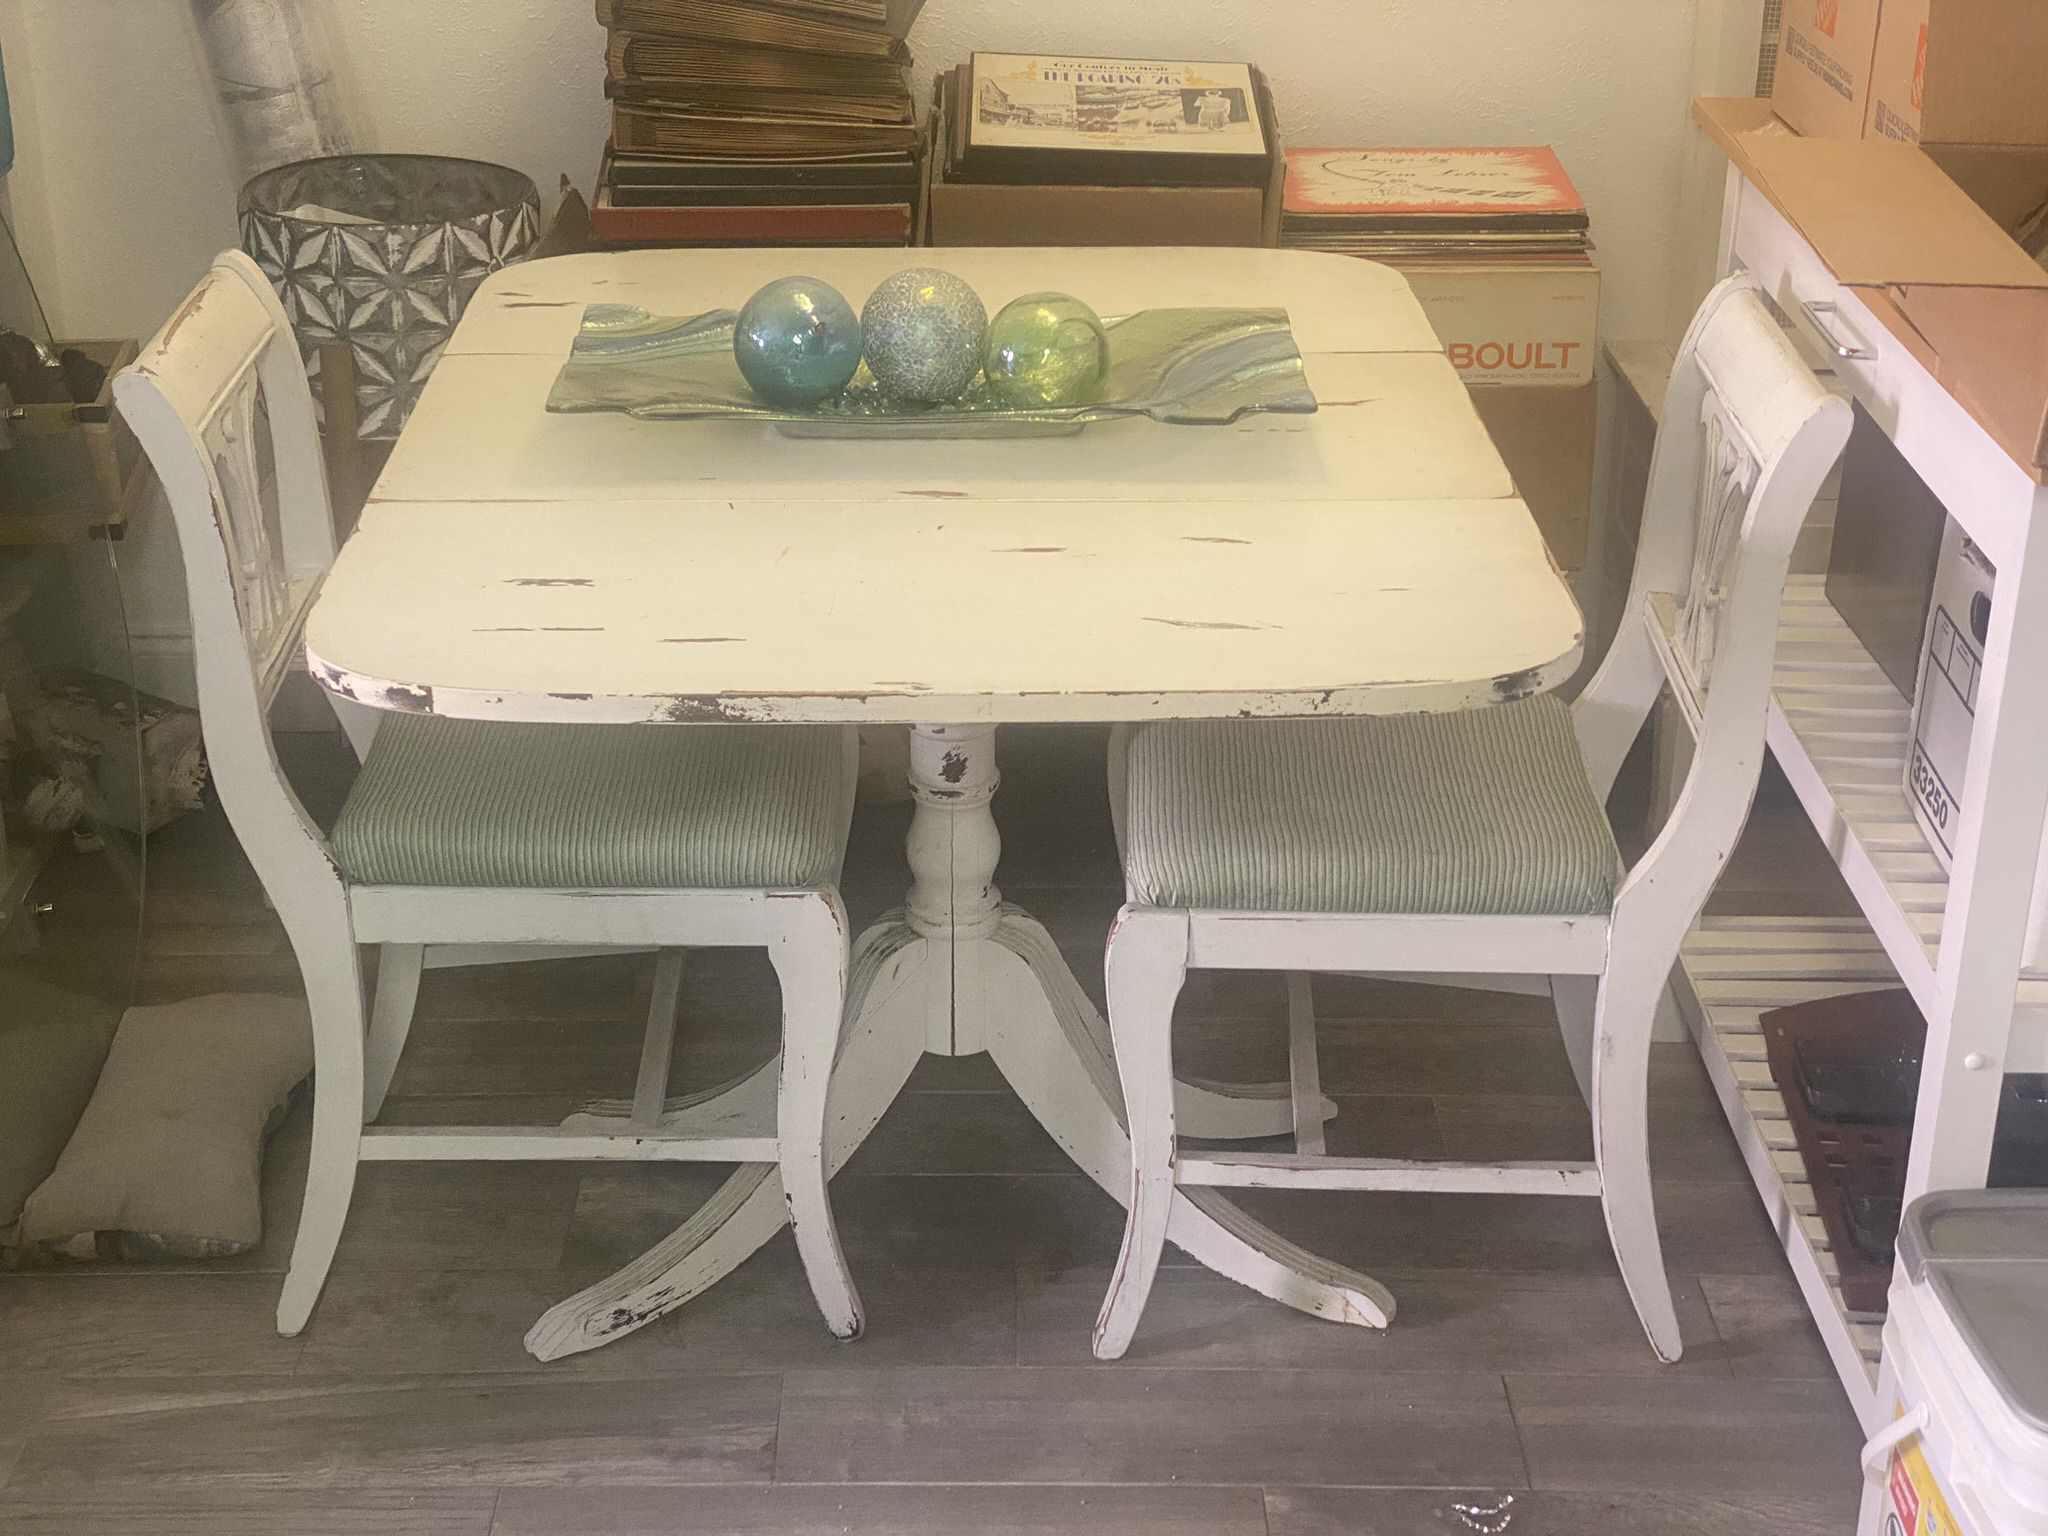 French Provincial Table and Chairs